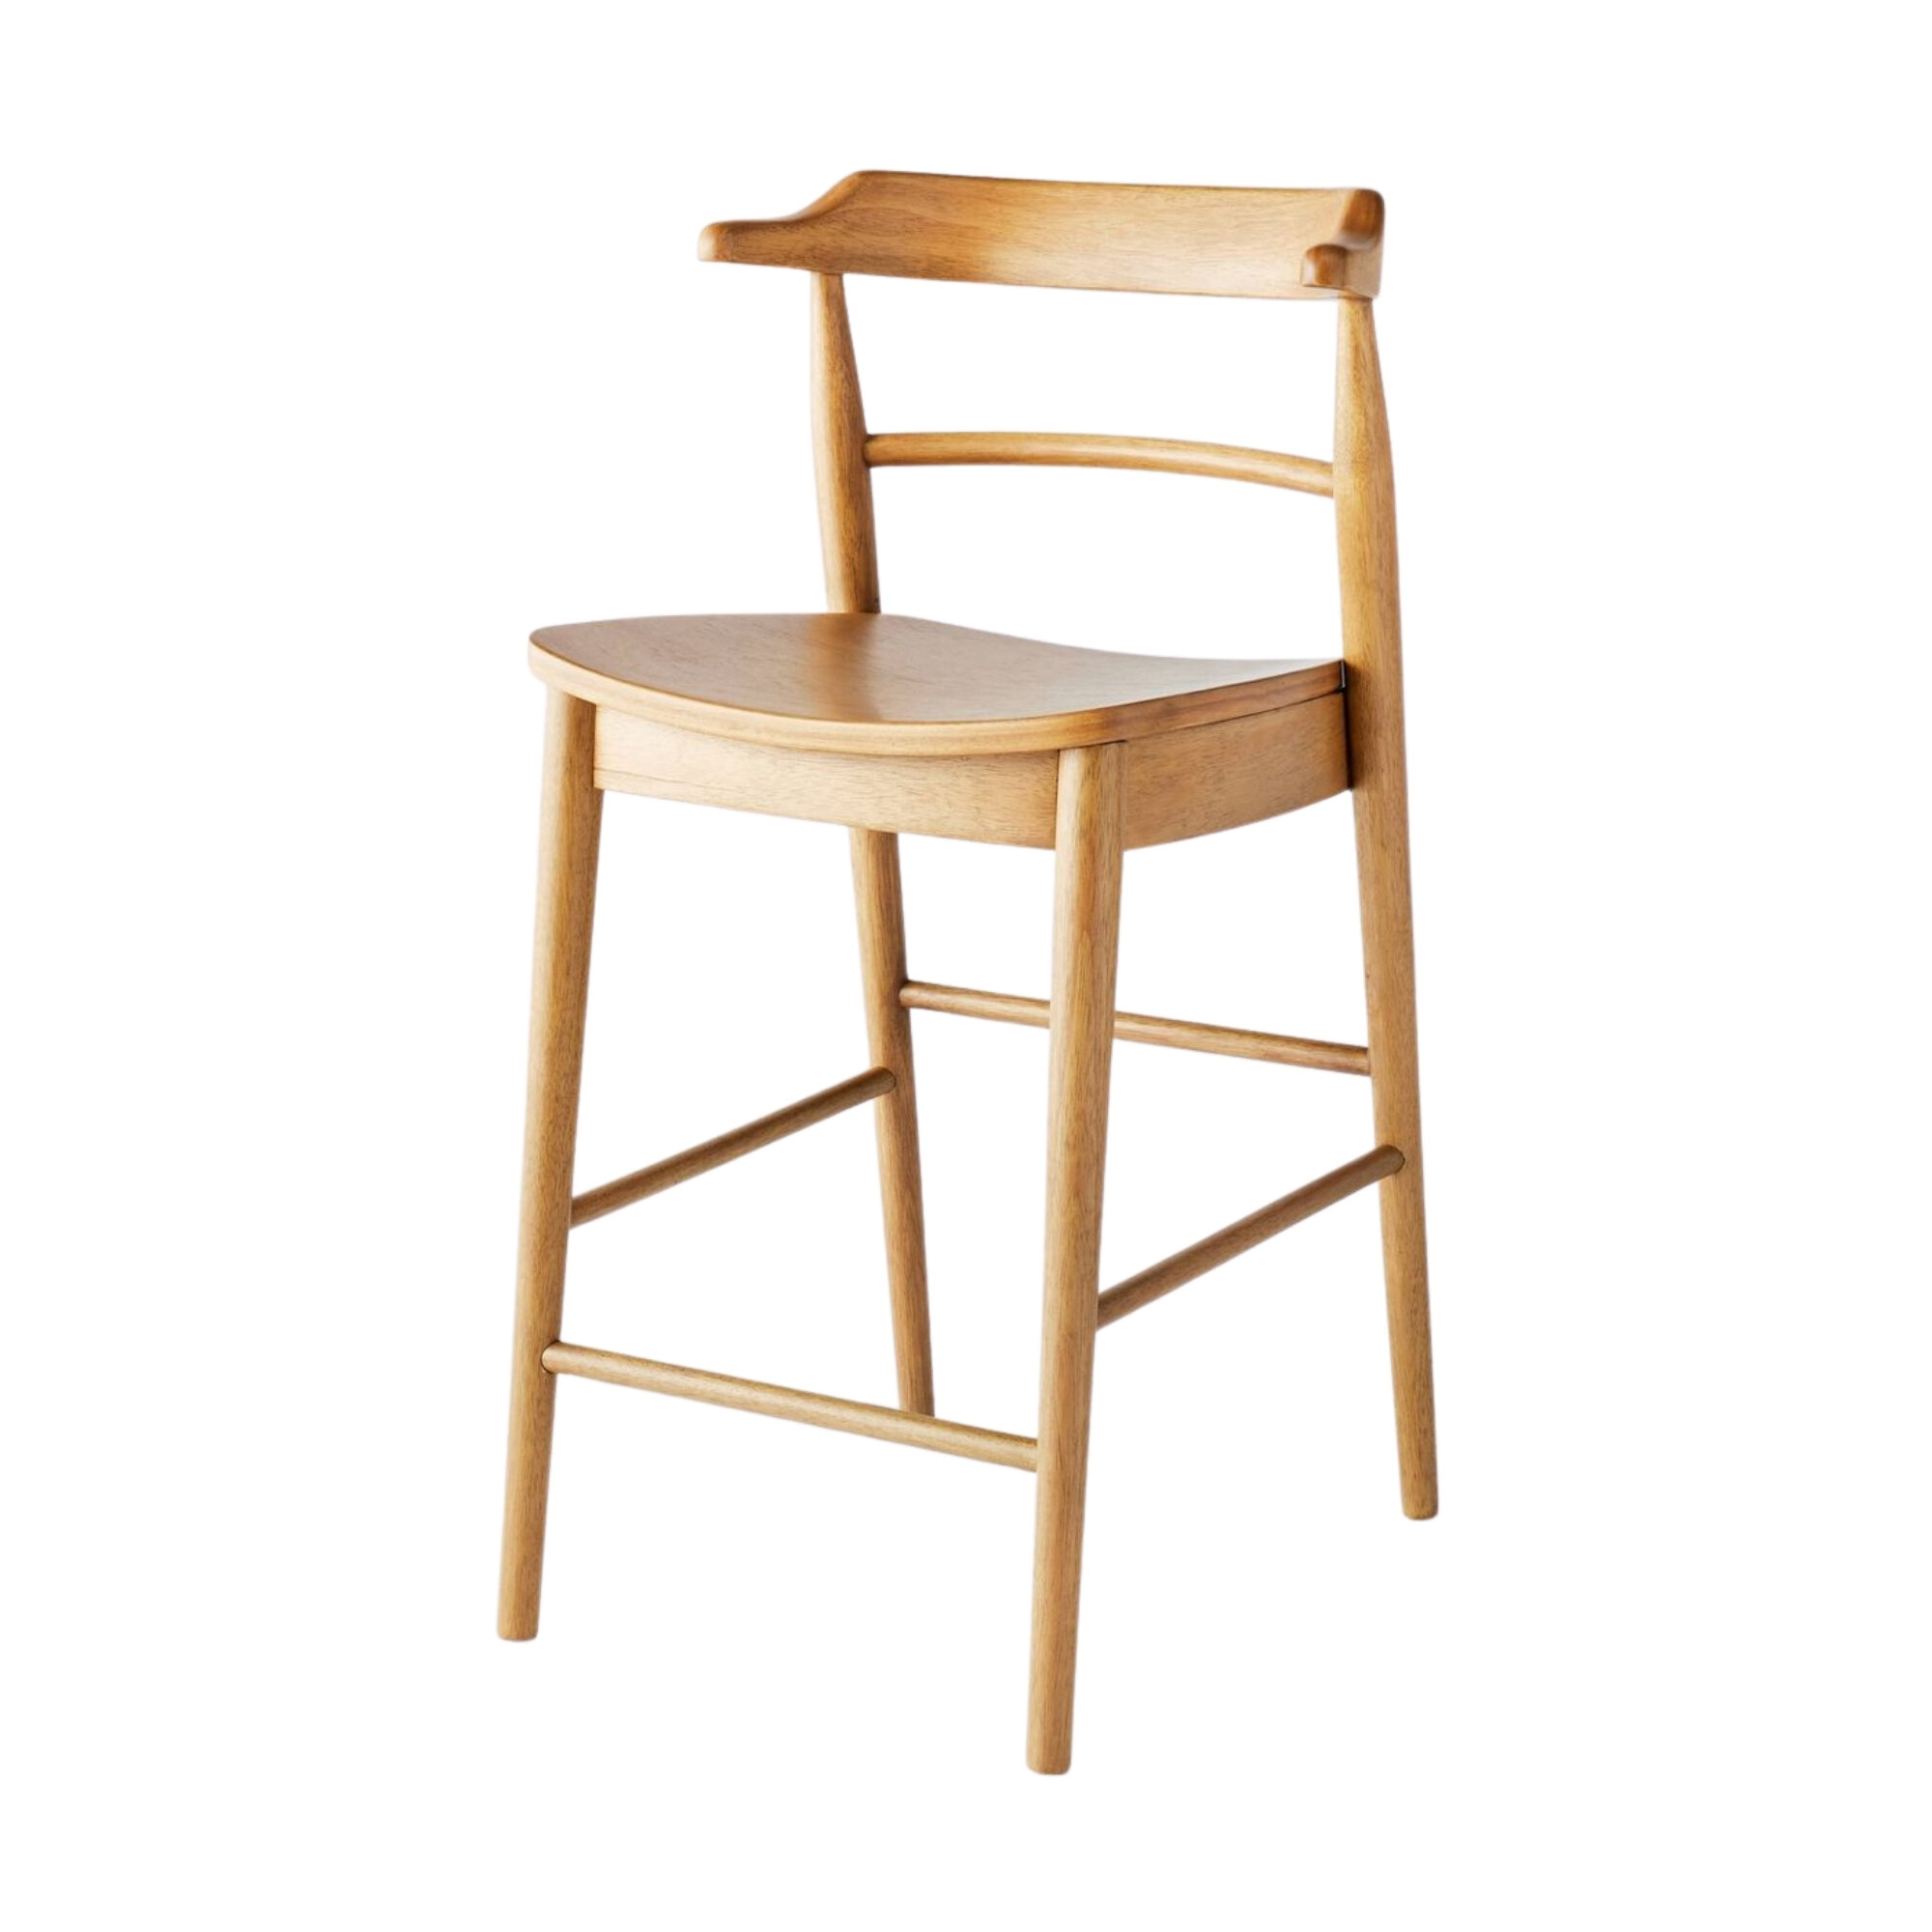 Curved Back Dining Chair, $159 for 2